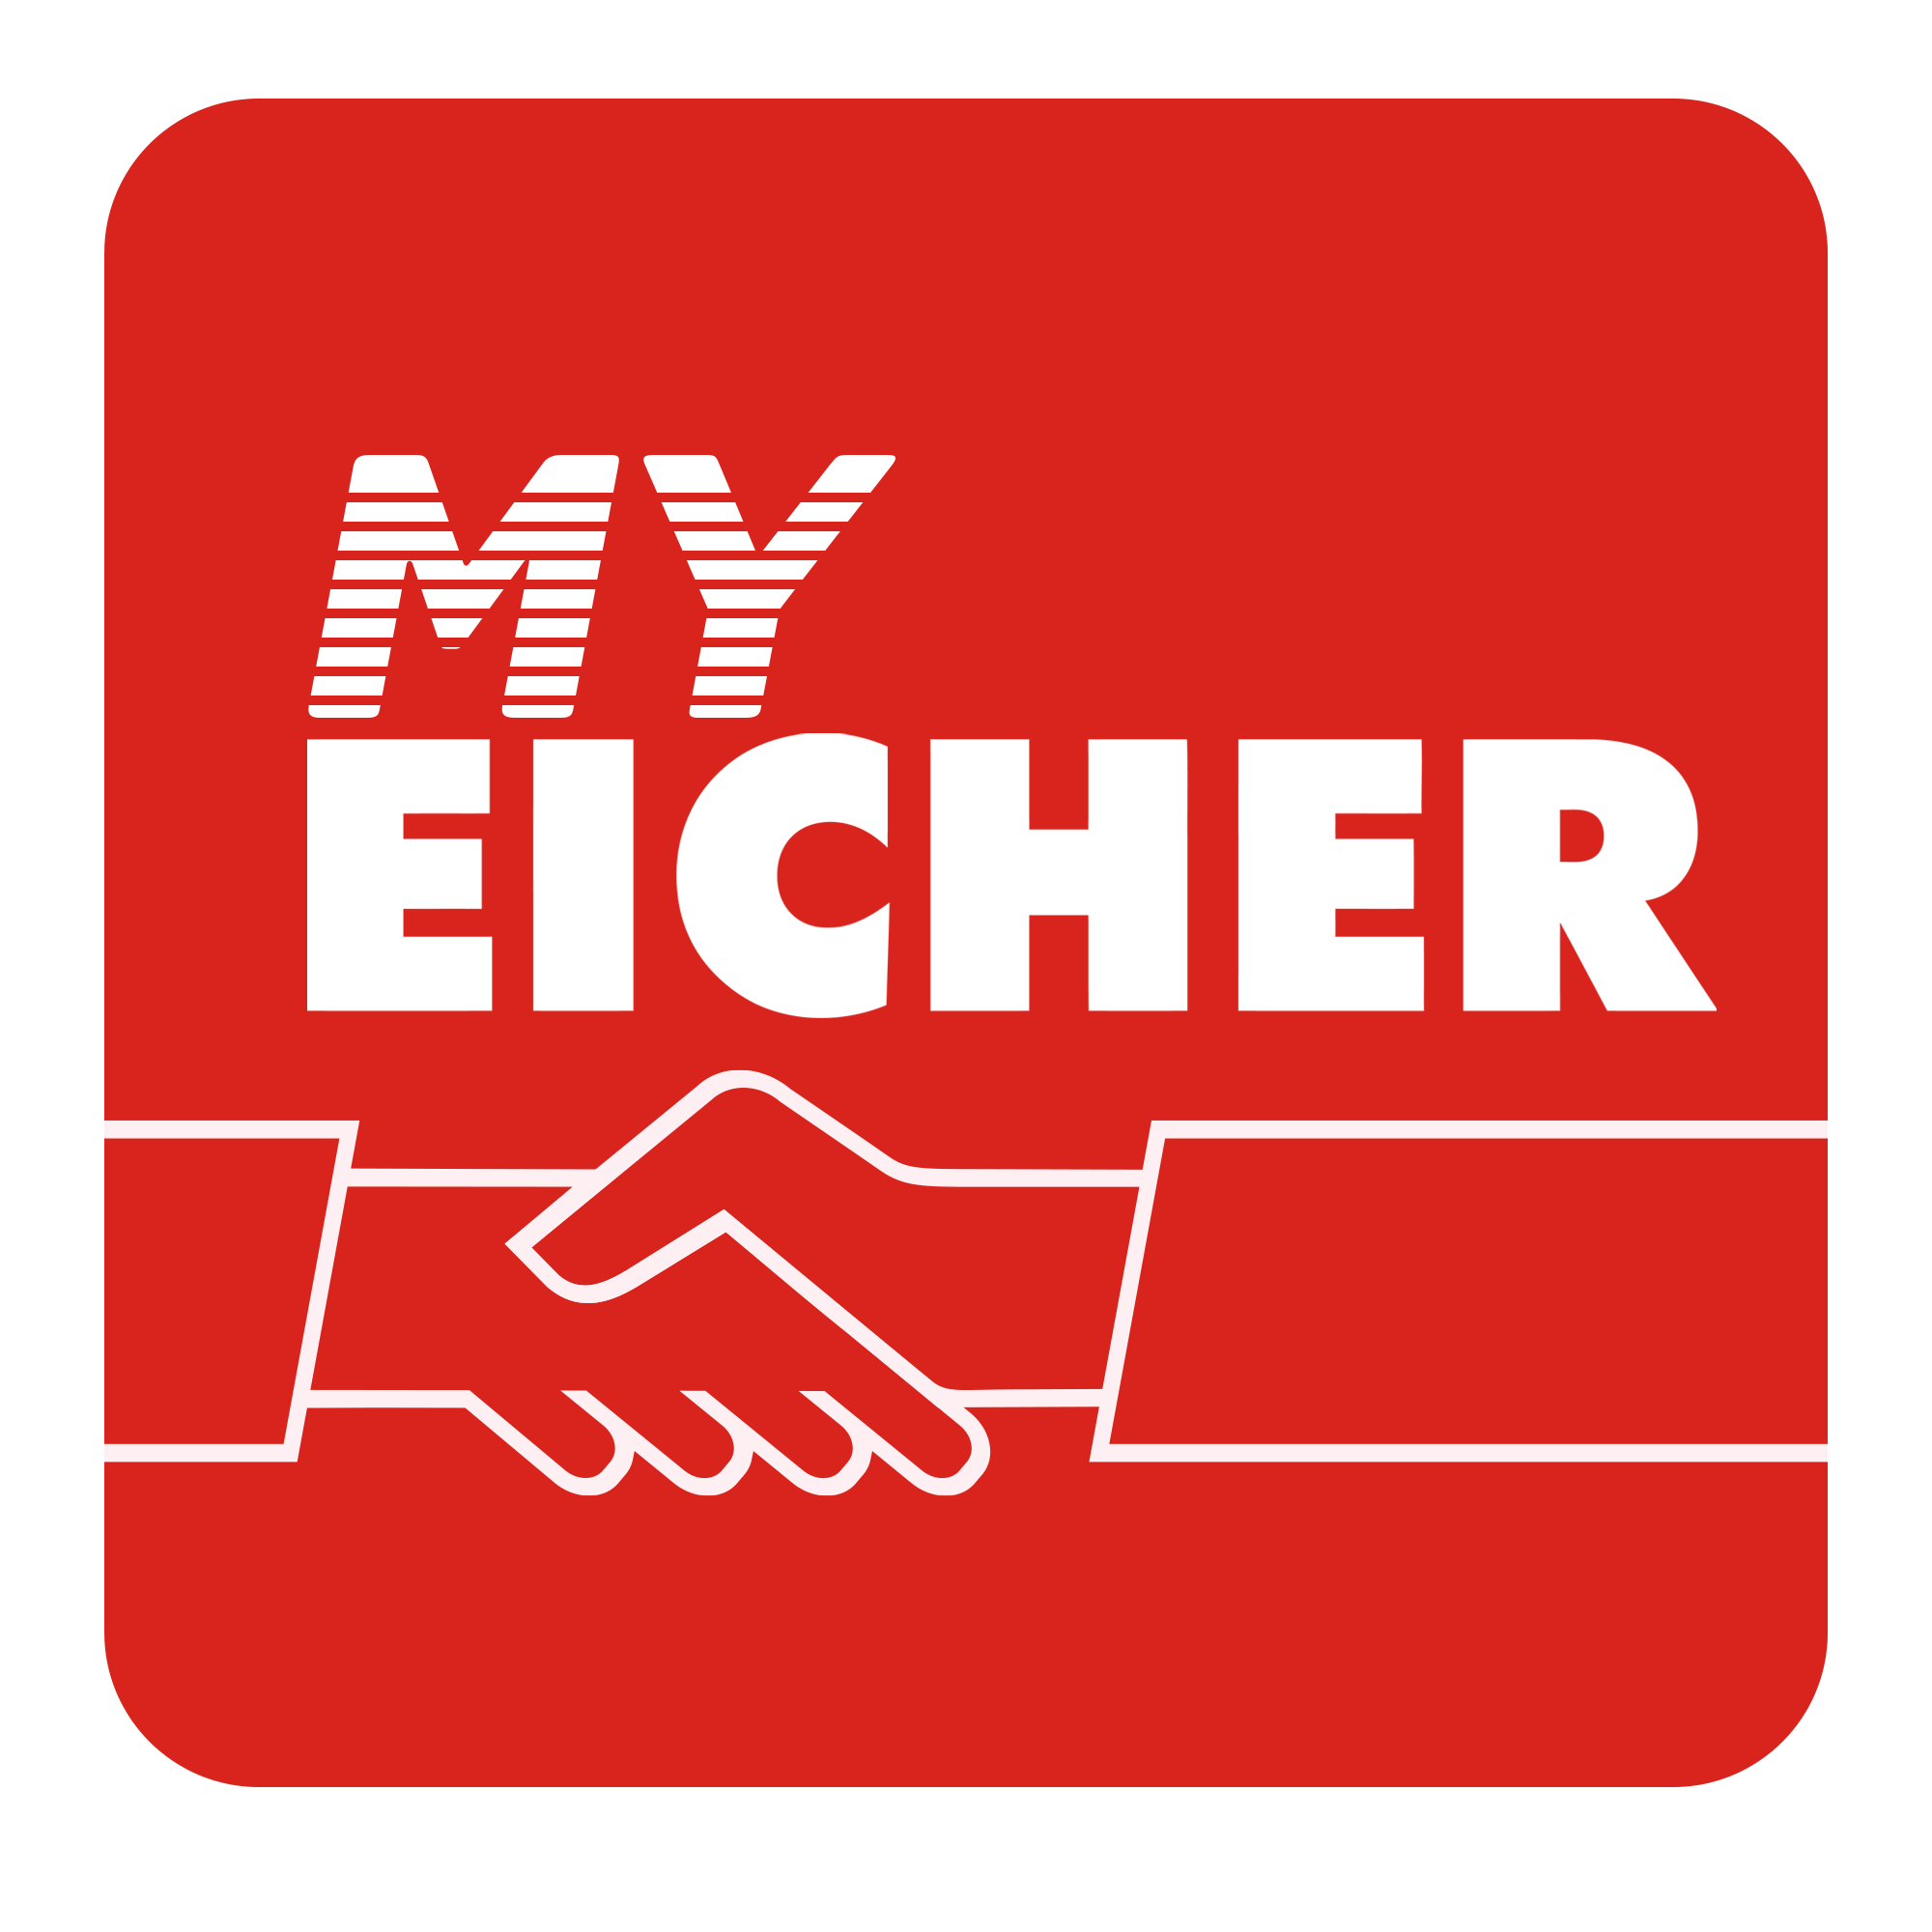 My Eicher app reached 75,000 customers